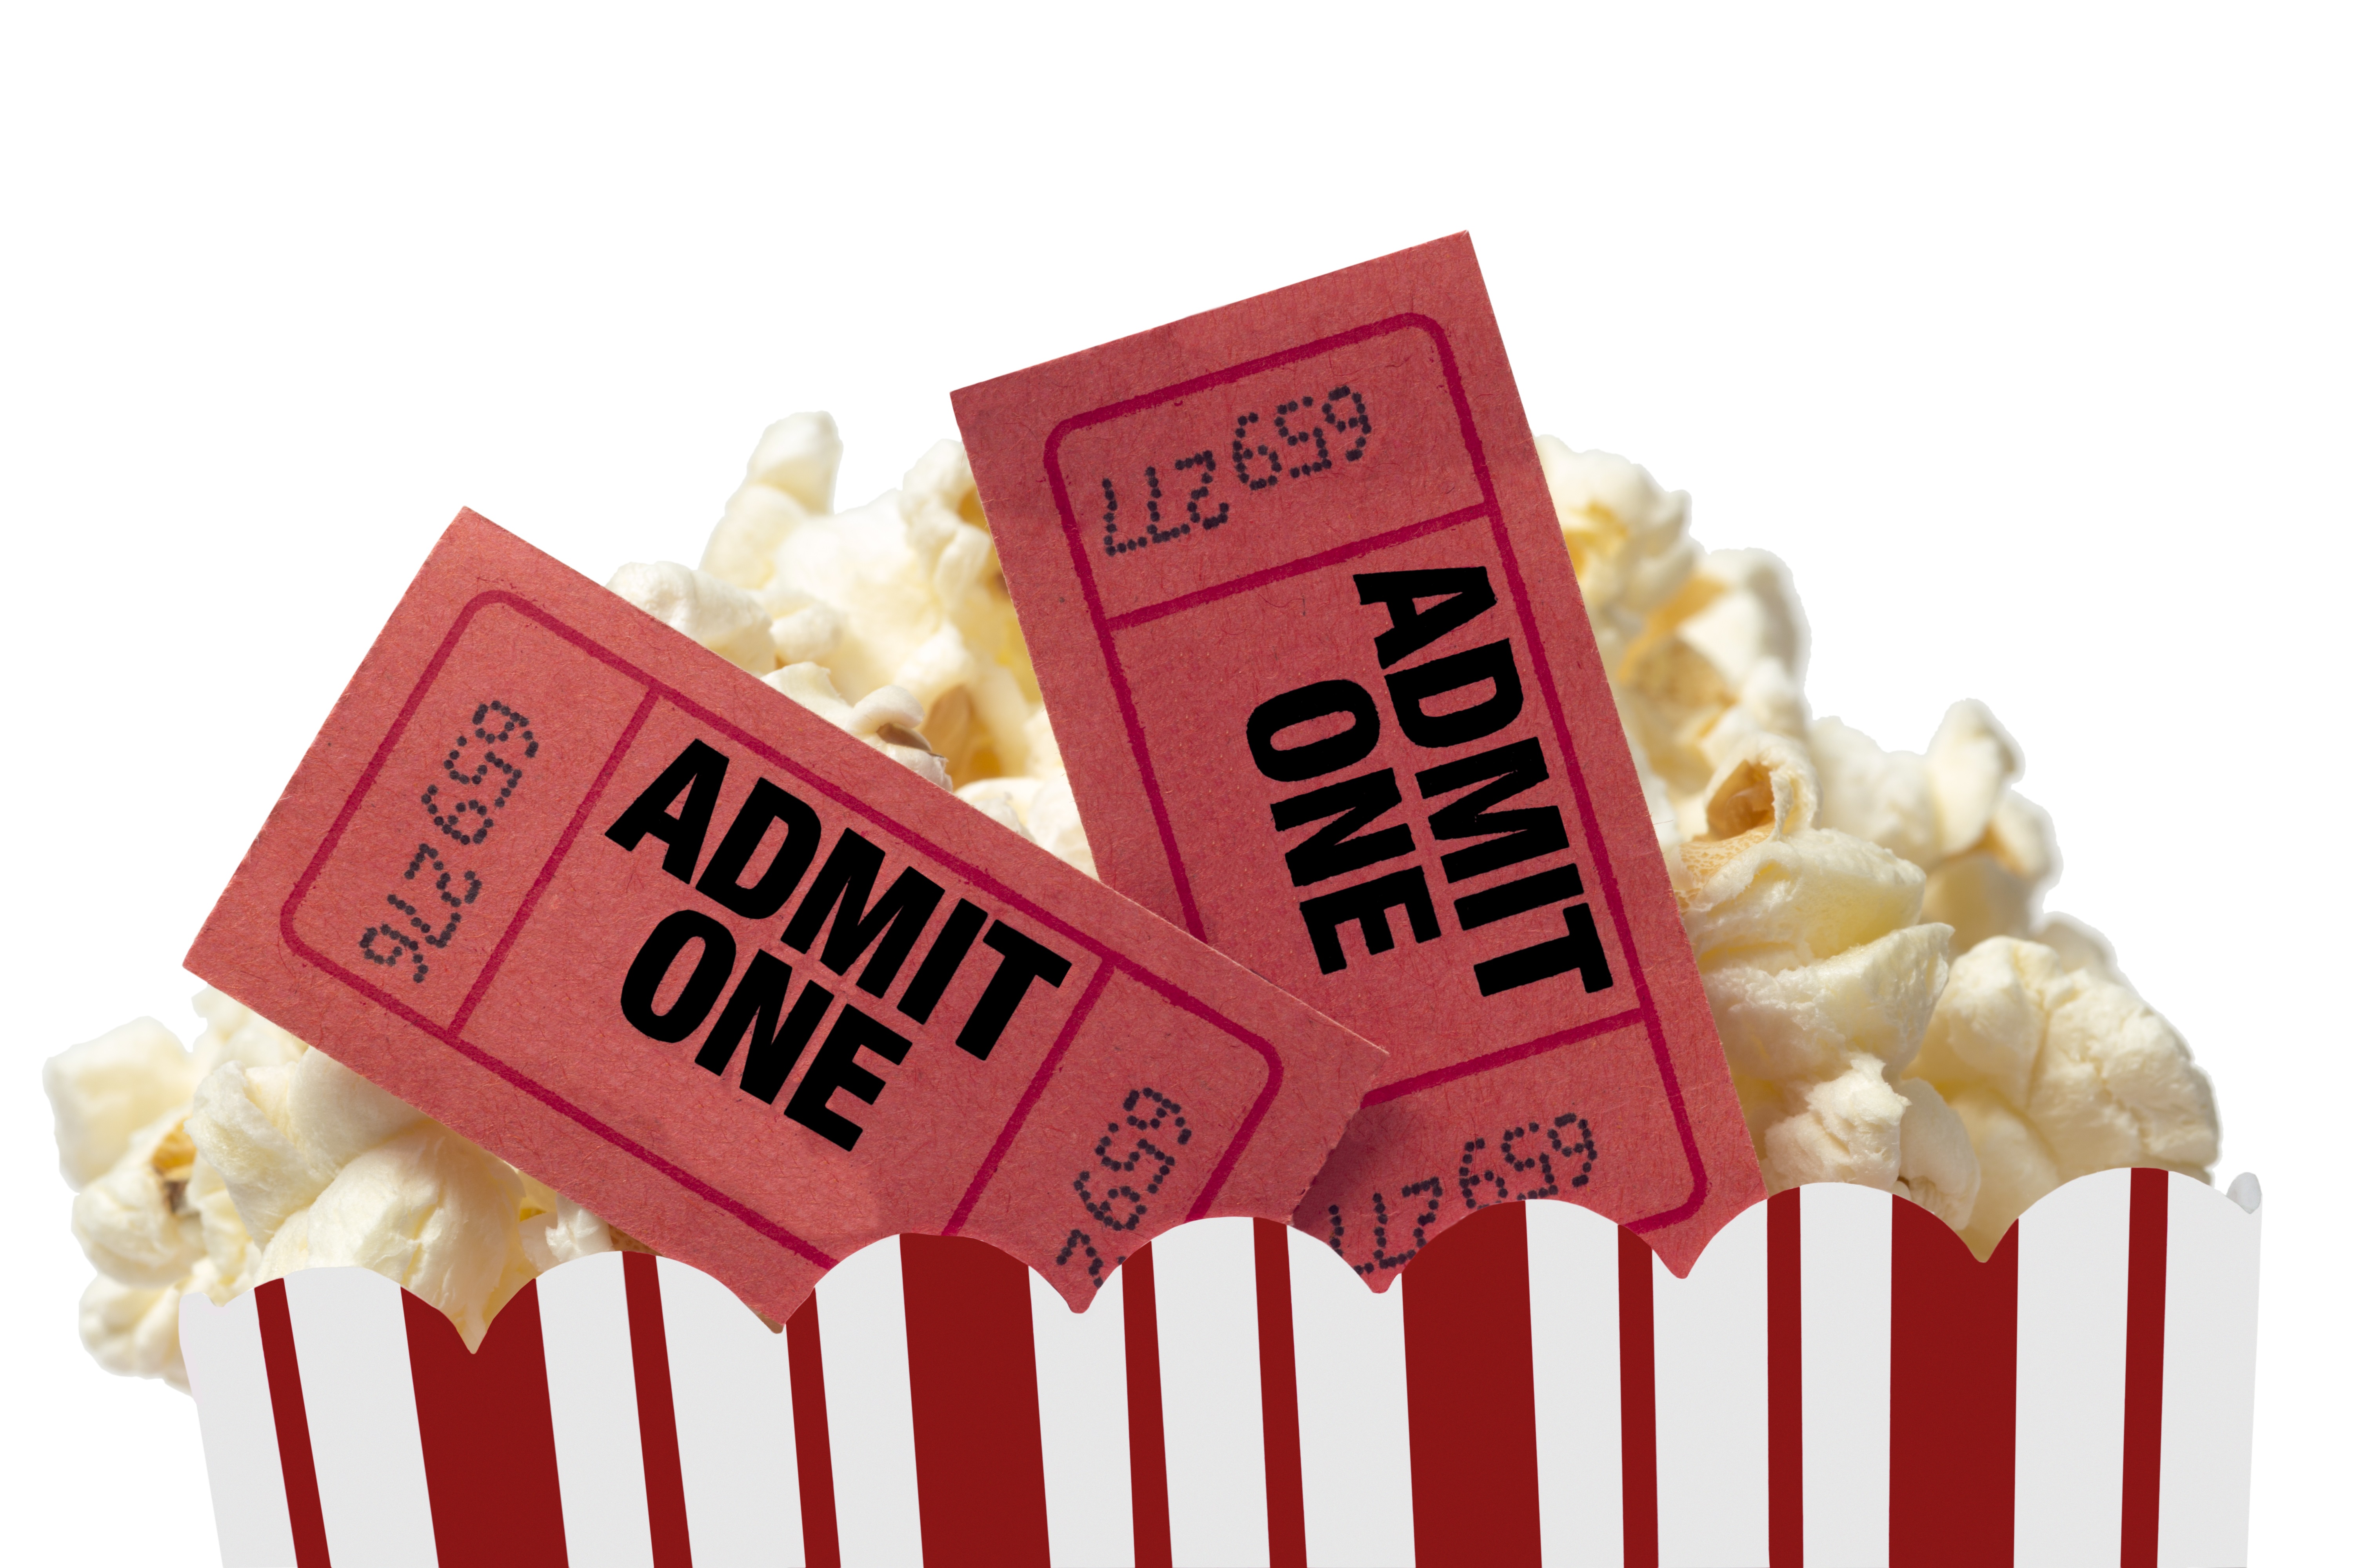 Two "Admit One" movie tickets are tucked into the top of a paper bucket of movie popcorn. 